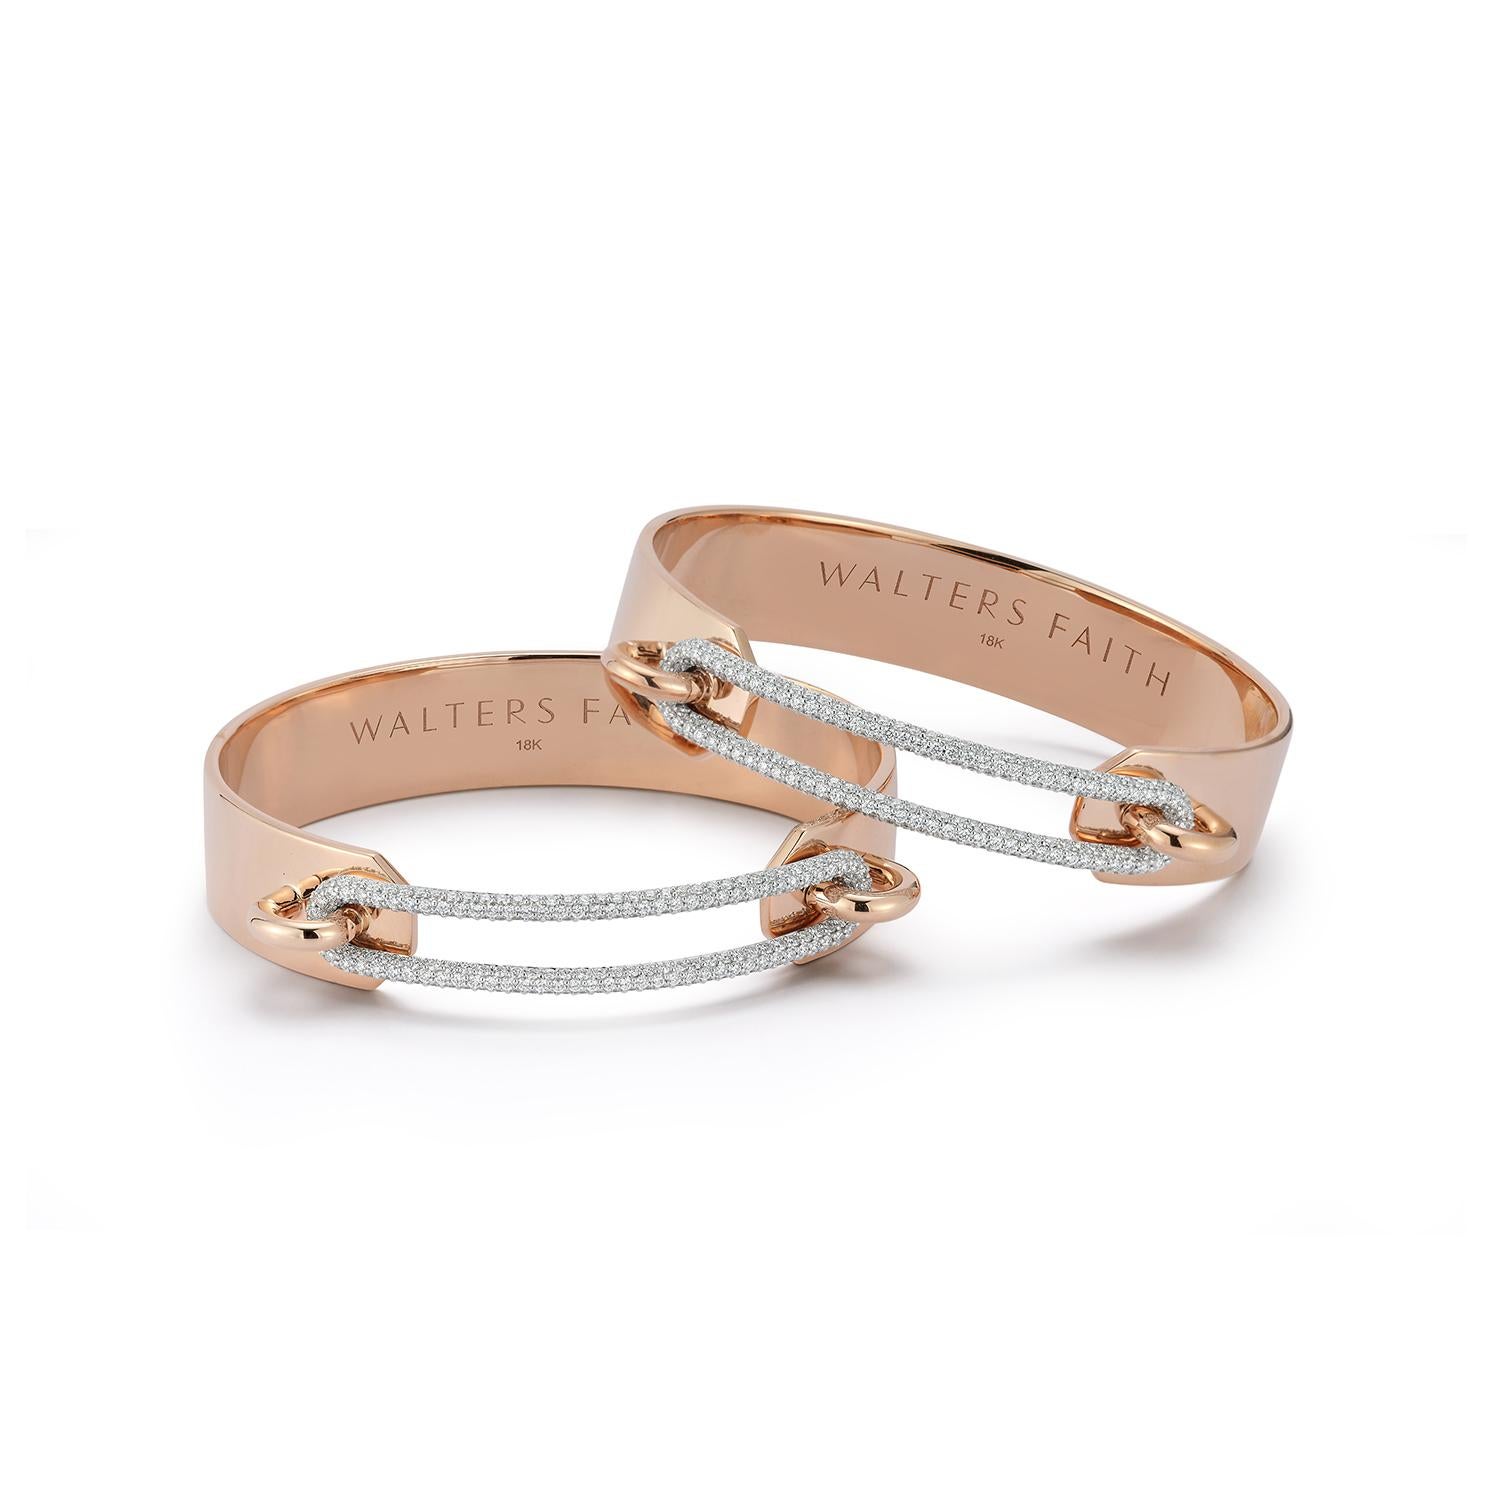 Brilliant Cut Walters Faith 18K Rose Gold Cuff Bracelet with Elongated Diamond Link For Sale